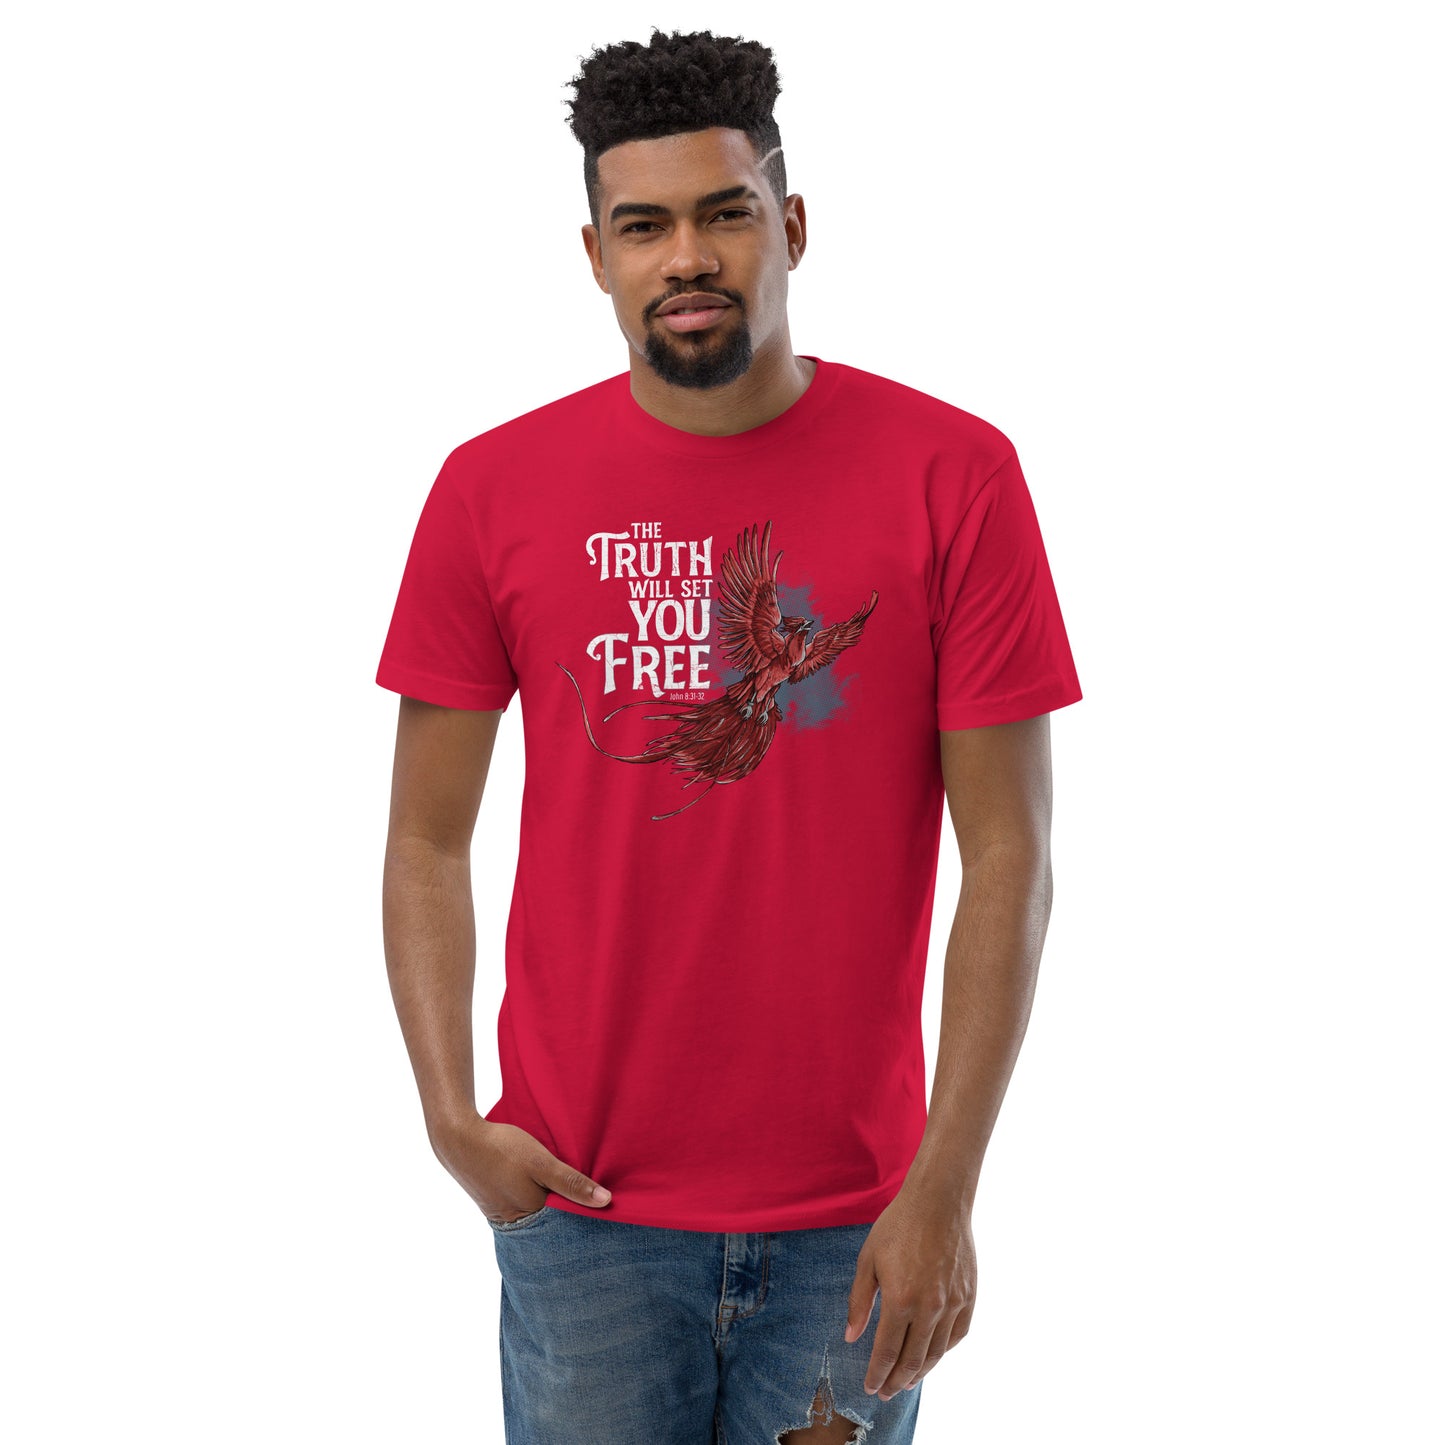 The Truth Will Set You Free - men's premium tee